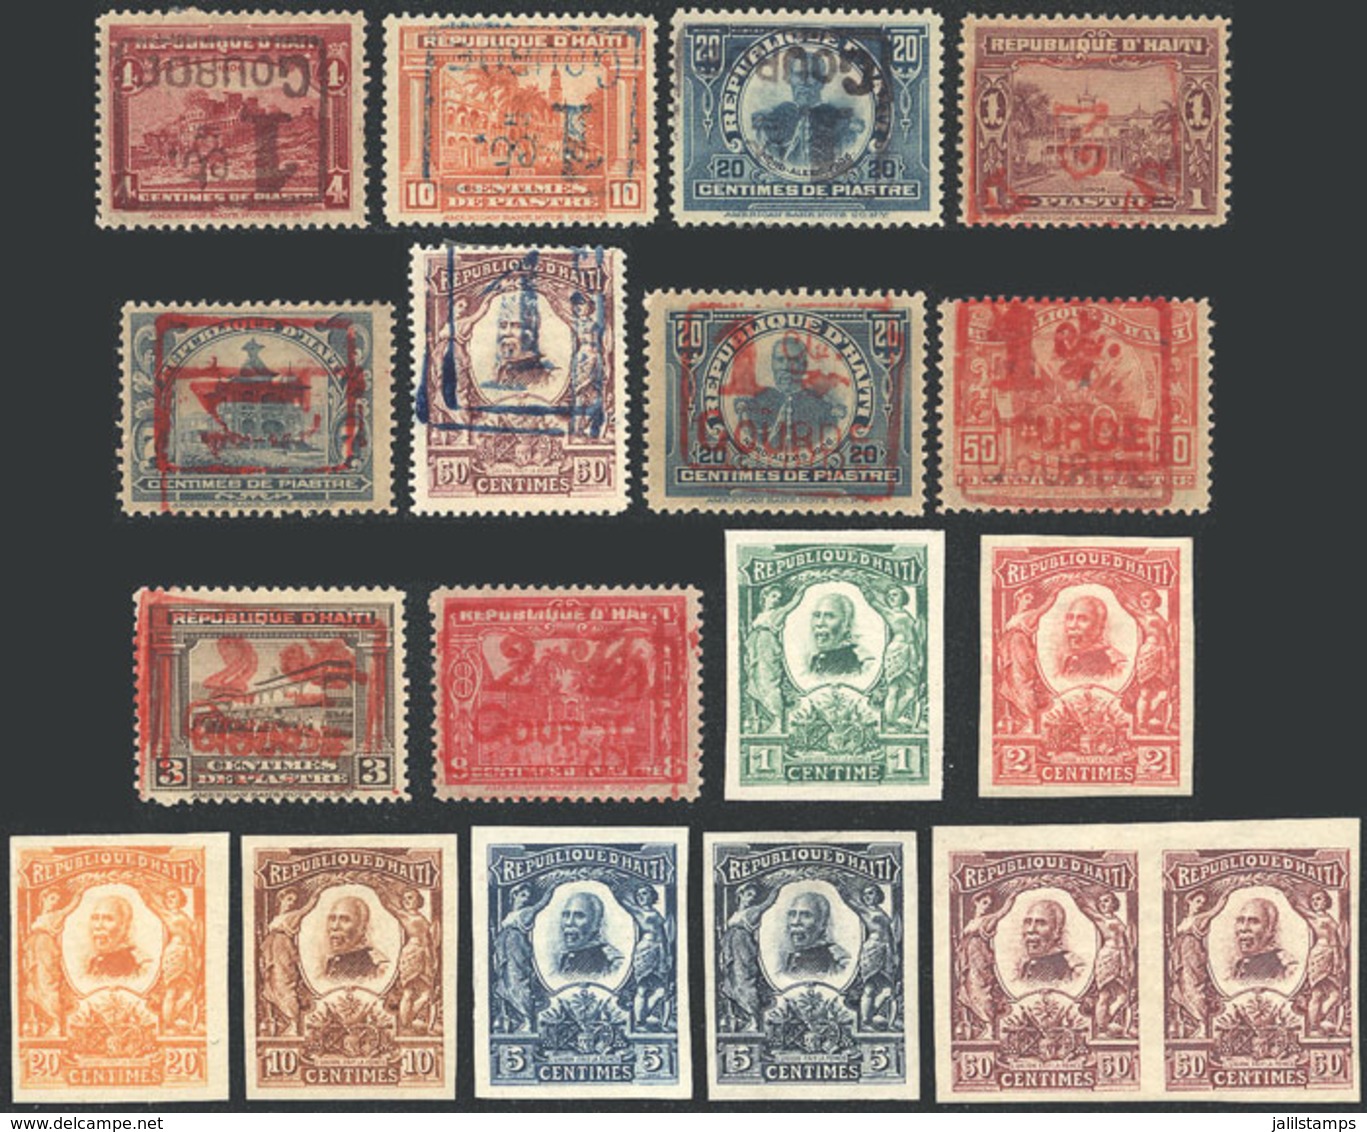 HAITI: Lot Of Old Stamps, Varieties, Several Imperforate, Inverted Surcharges, Etc., VF General Quality! - Haiti